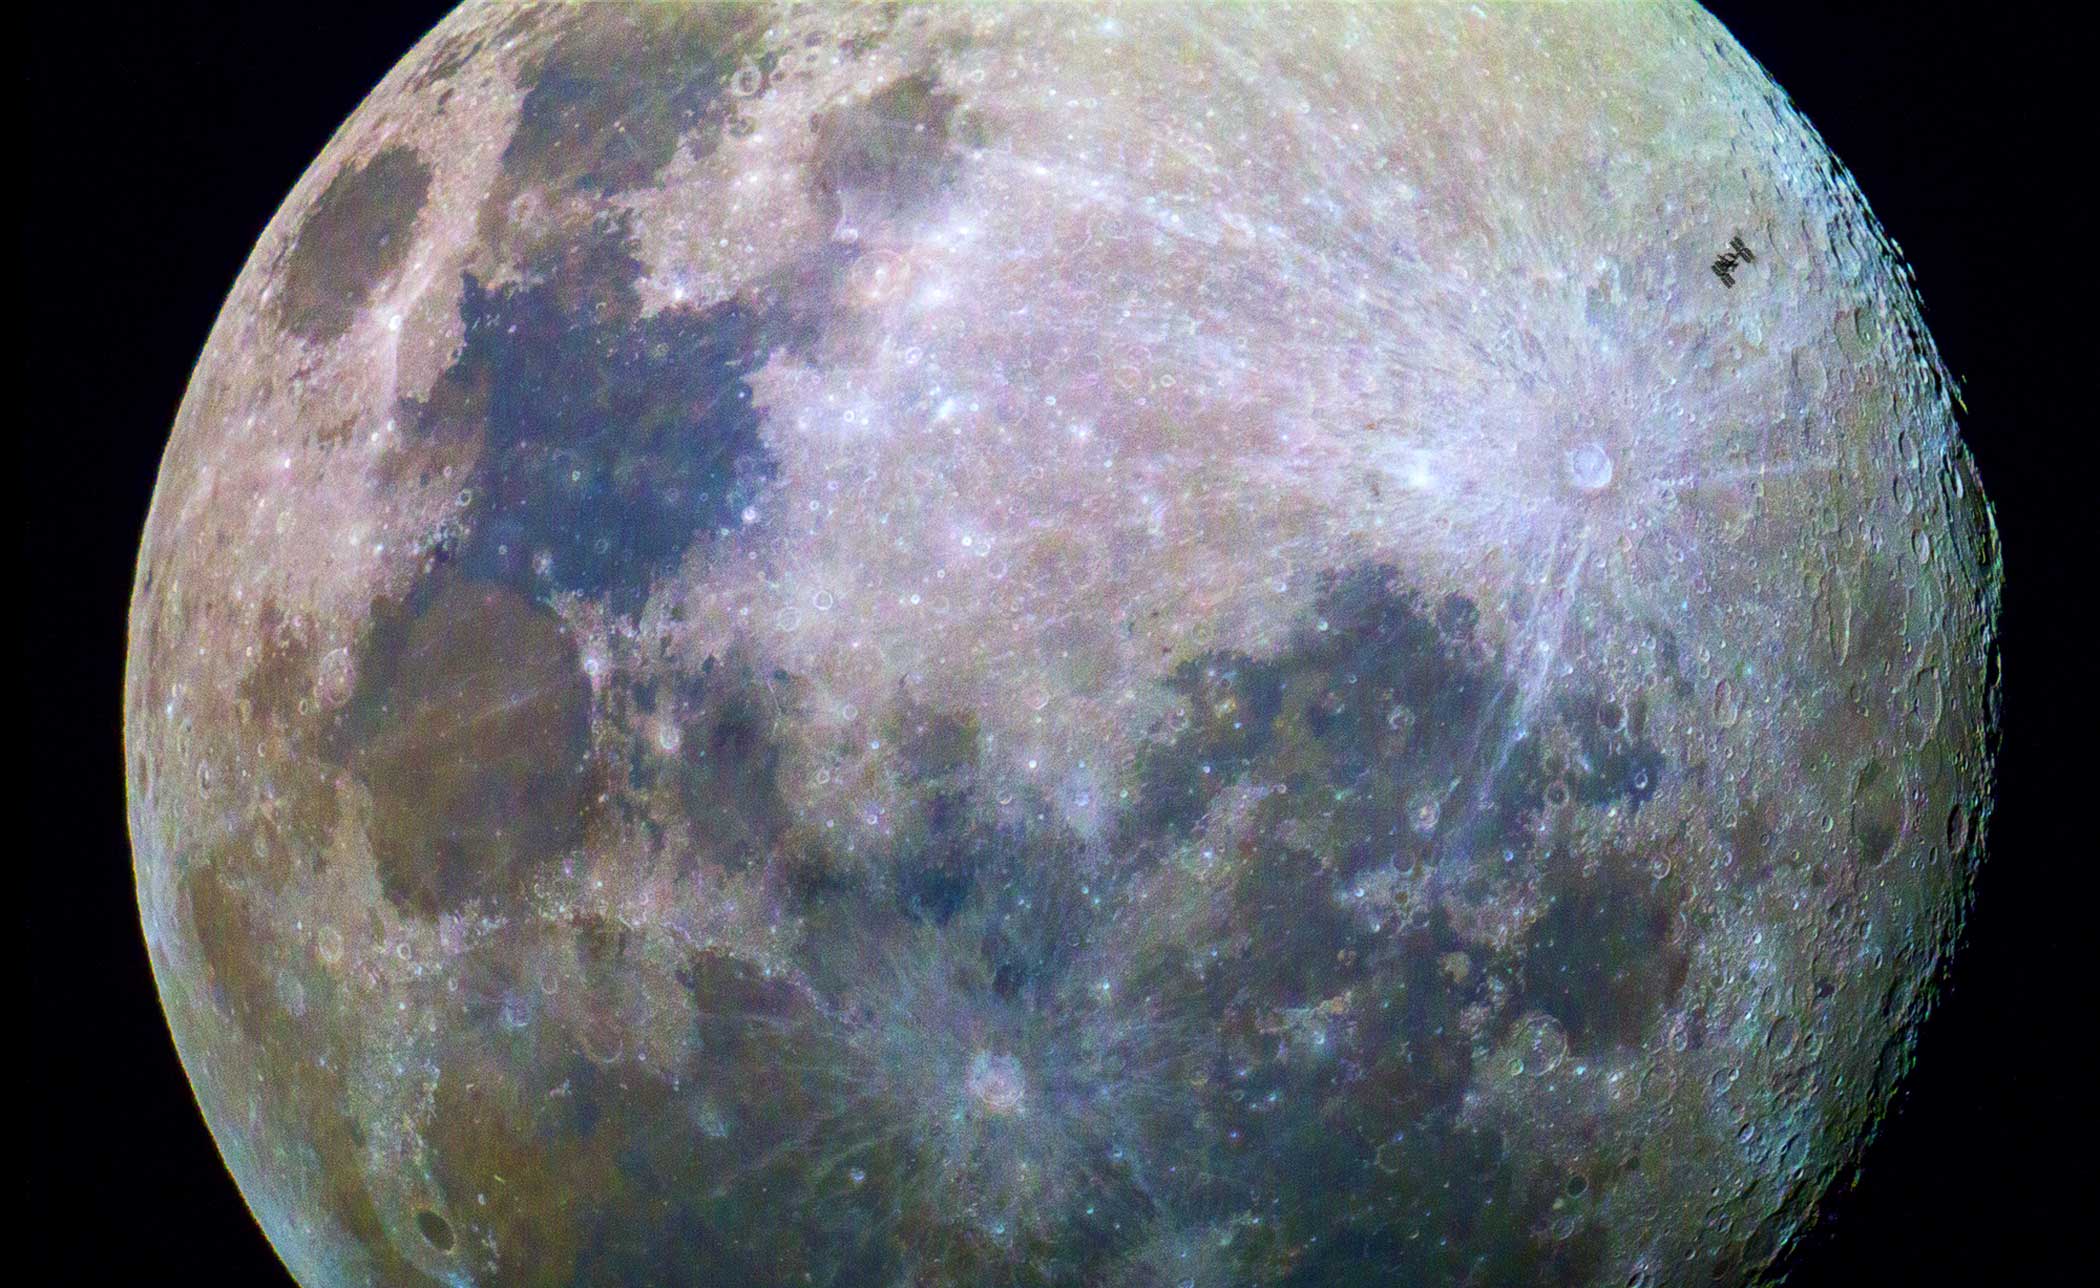 This image of the Moon was taken by amateur photographer Dylan O’Donnell as the International Space Station passed by at 28 800 km/h. At such speeds the weightless research laboratory was visible for only about a third of a second before returning to the dark skies.